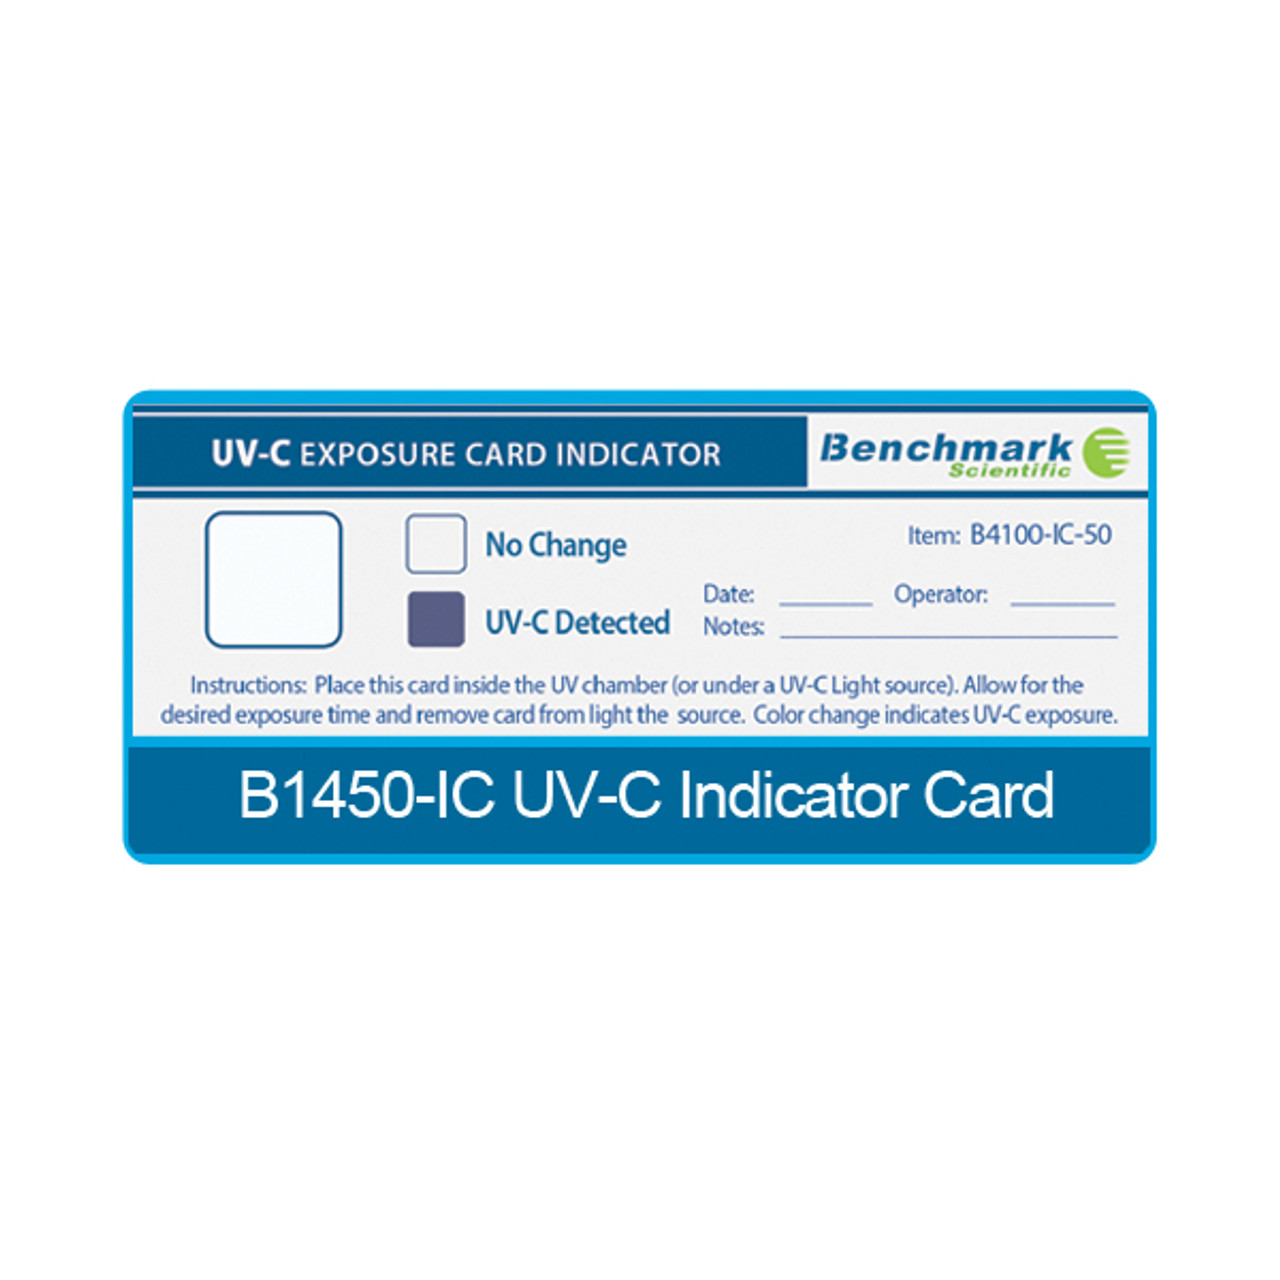 Are cheap UV detection cards any good? 